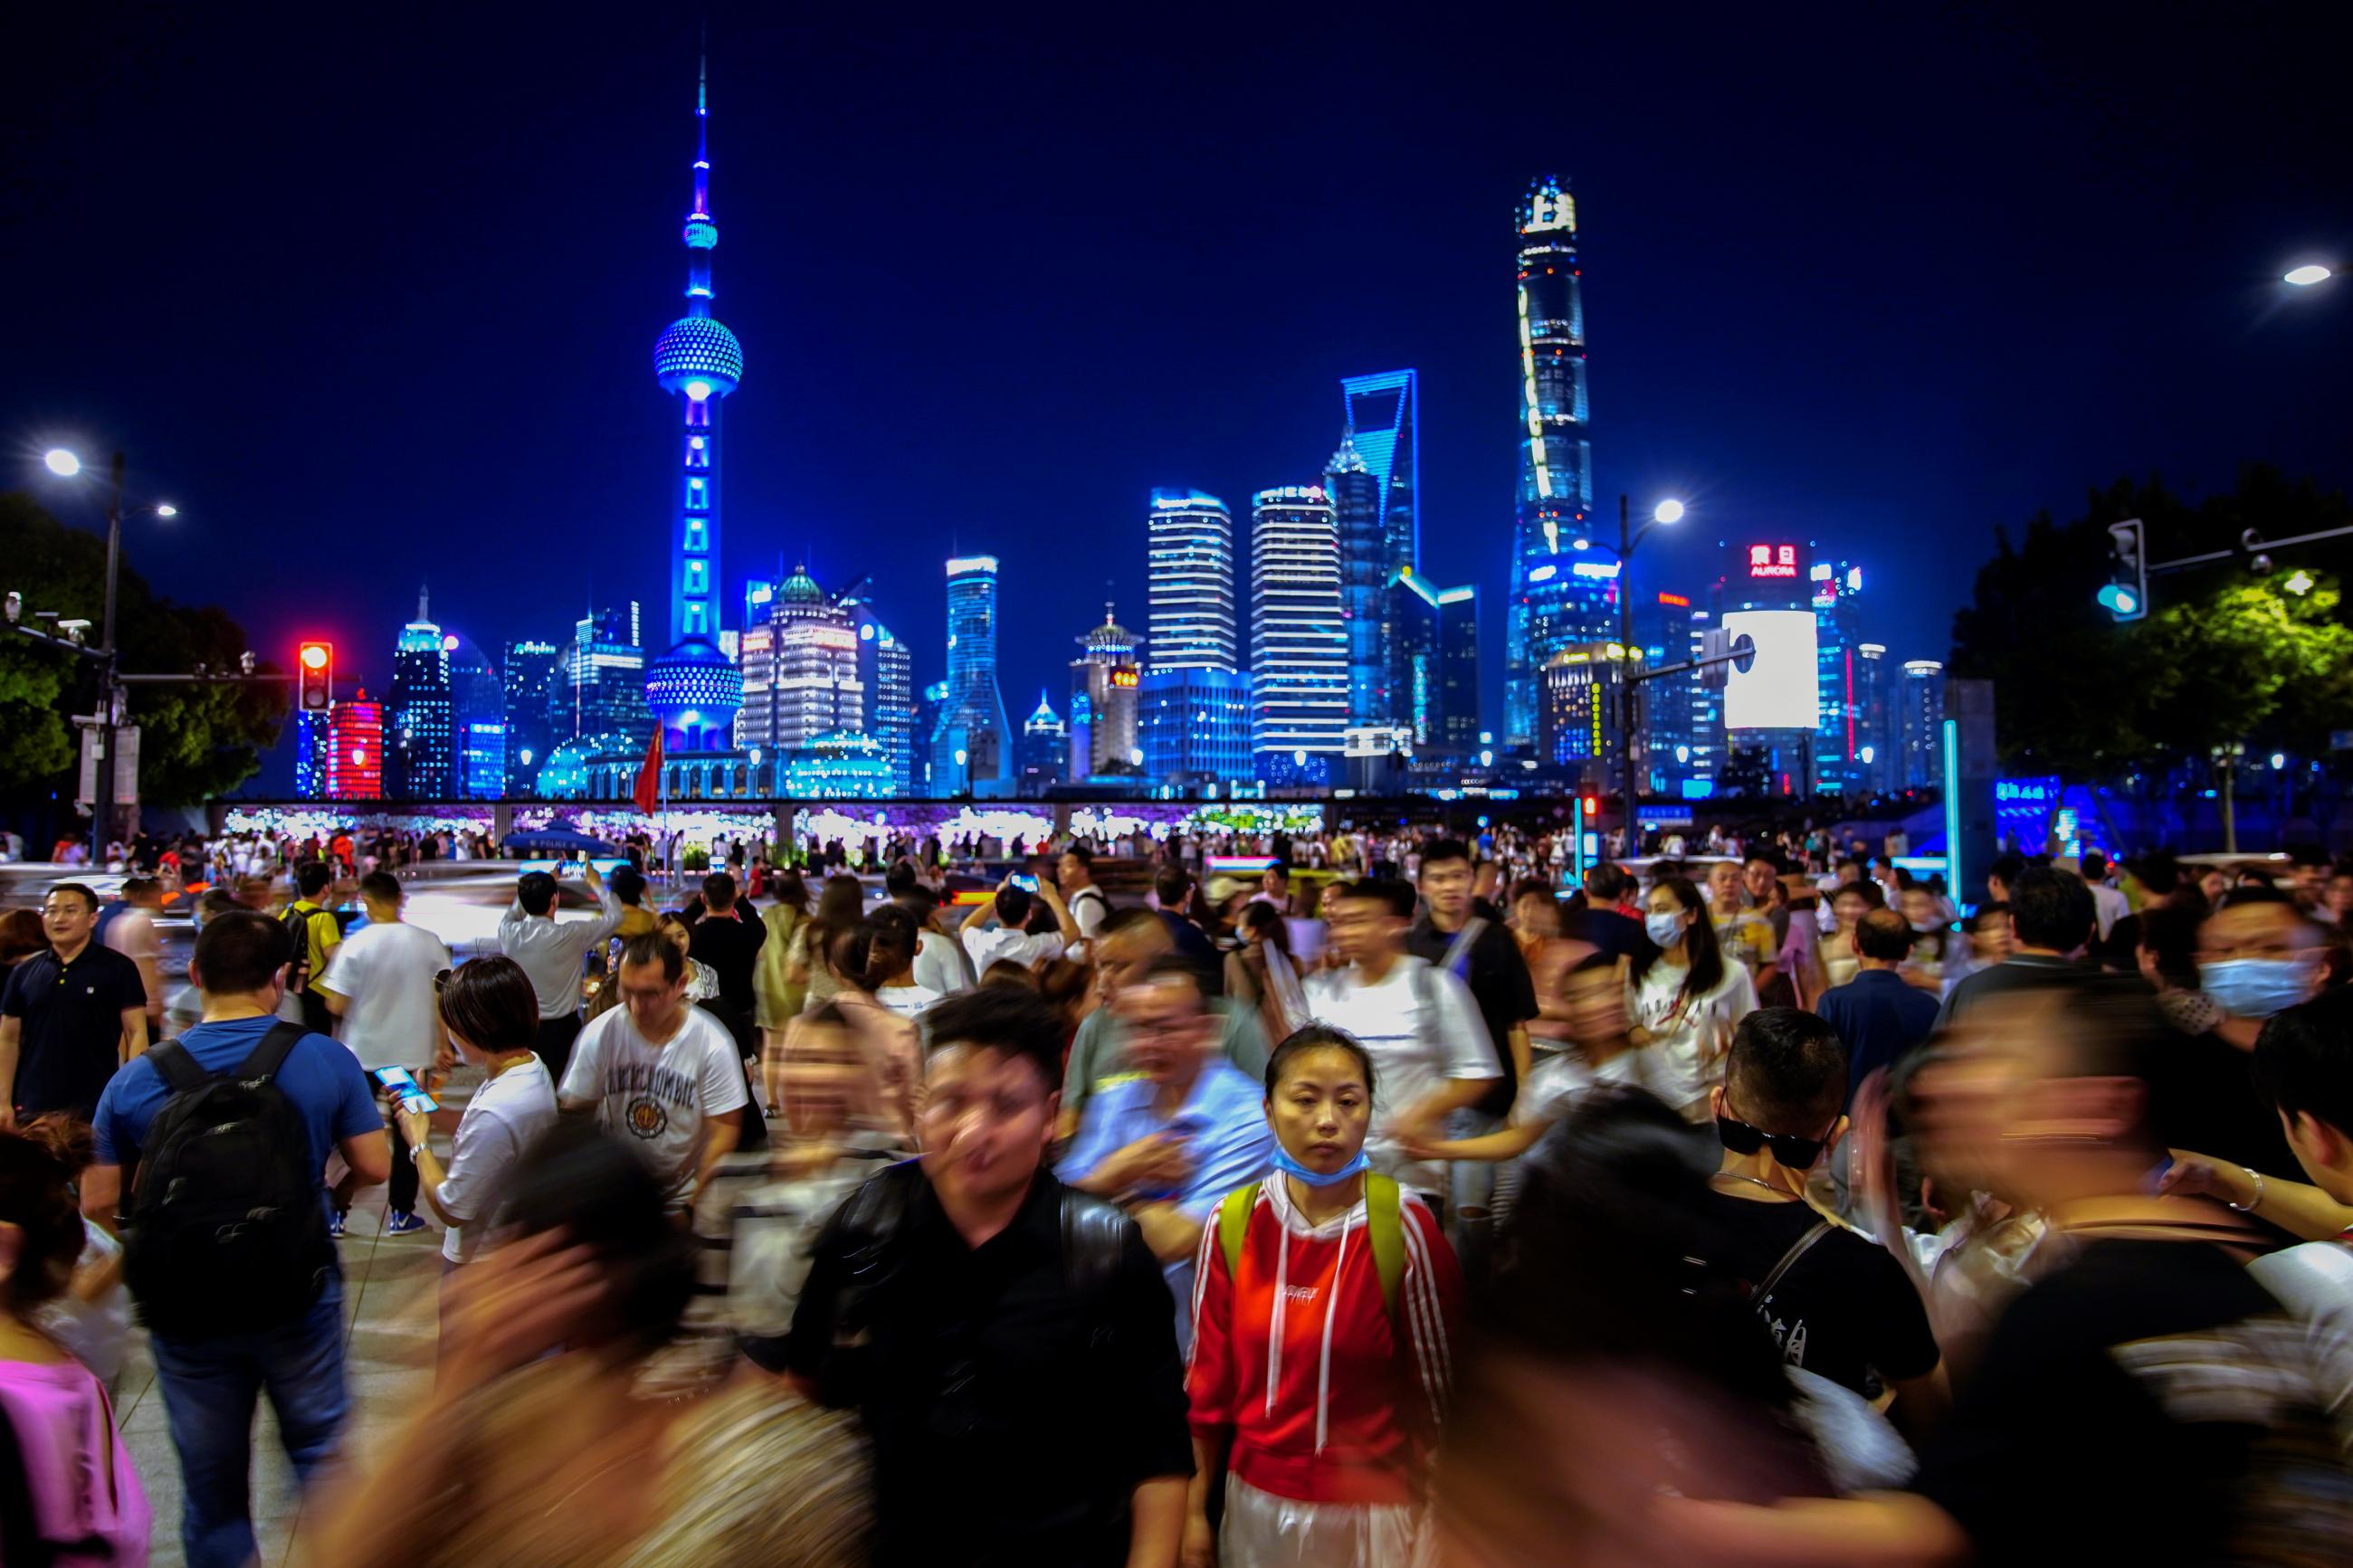 People walk along near the Bund, in front of Lujiazui financial district of Pudong, following the outbreak of the coronavirus disease (COVID-19), in Shanghai, China May 10, 2021